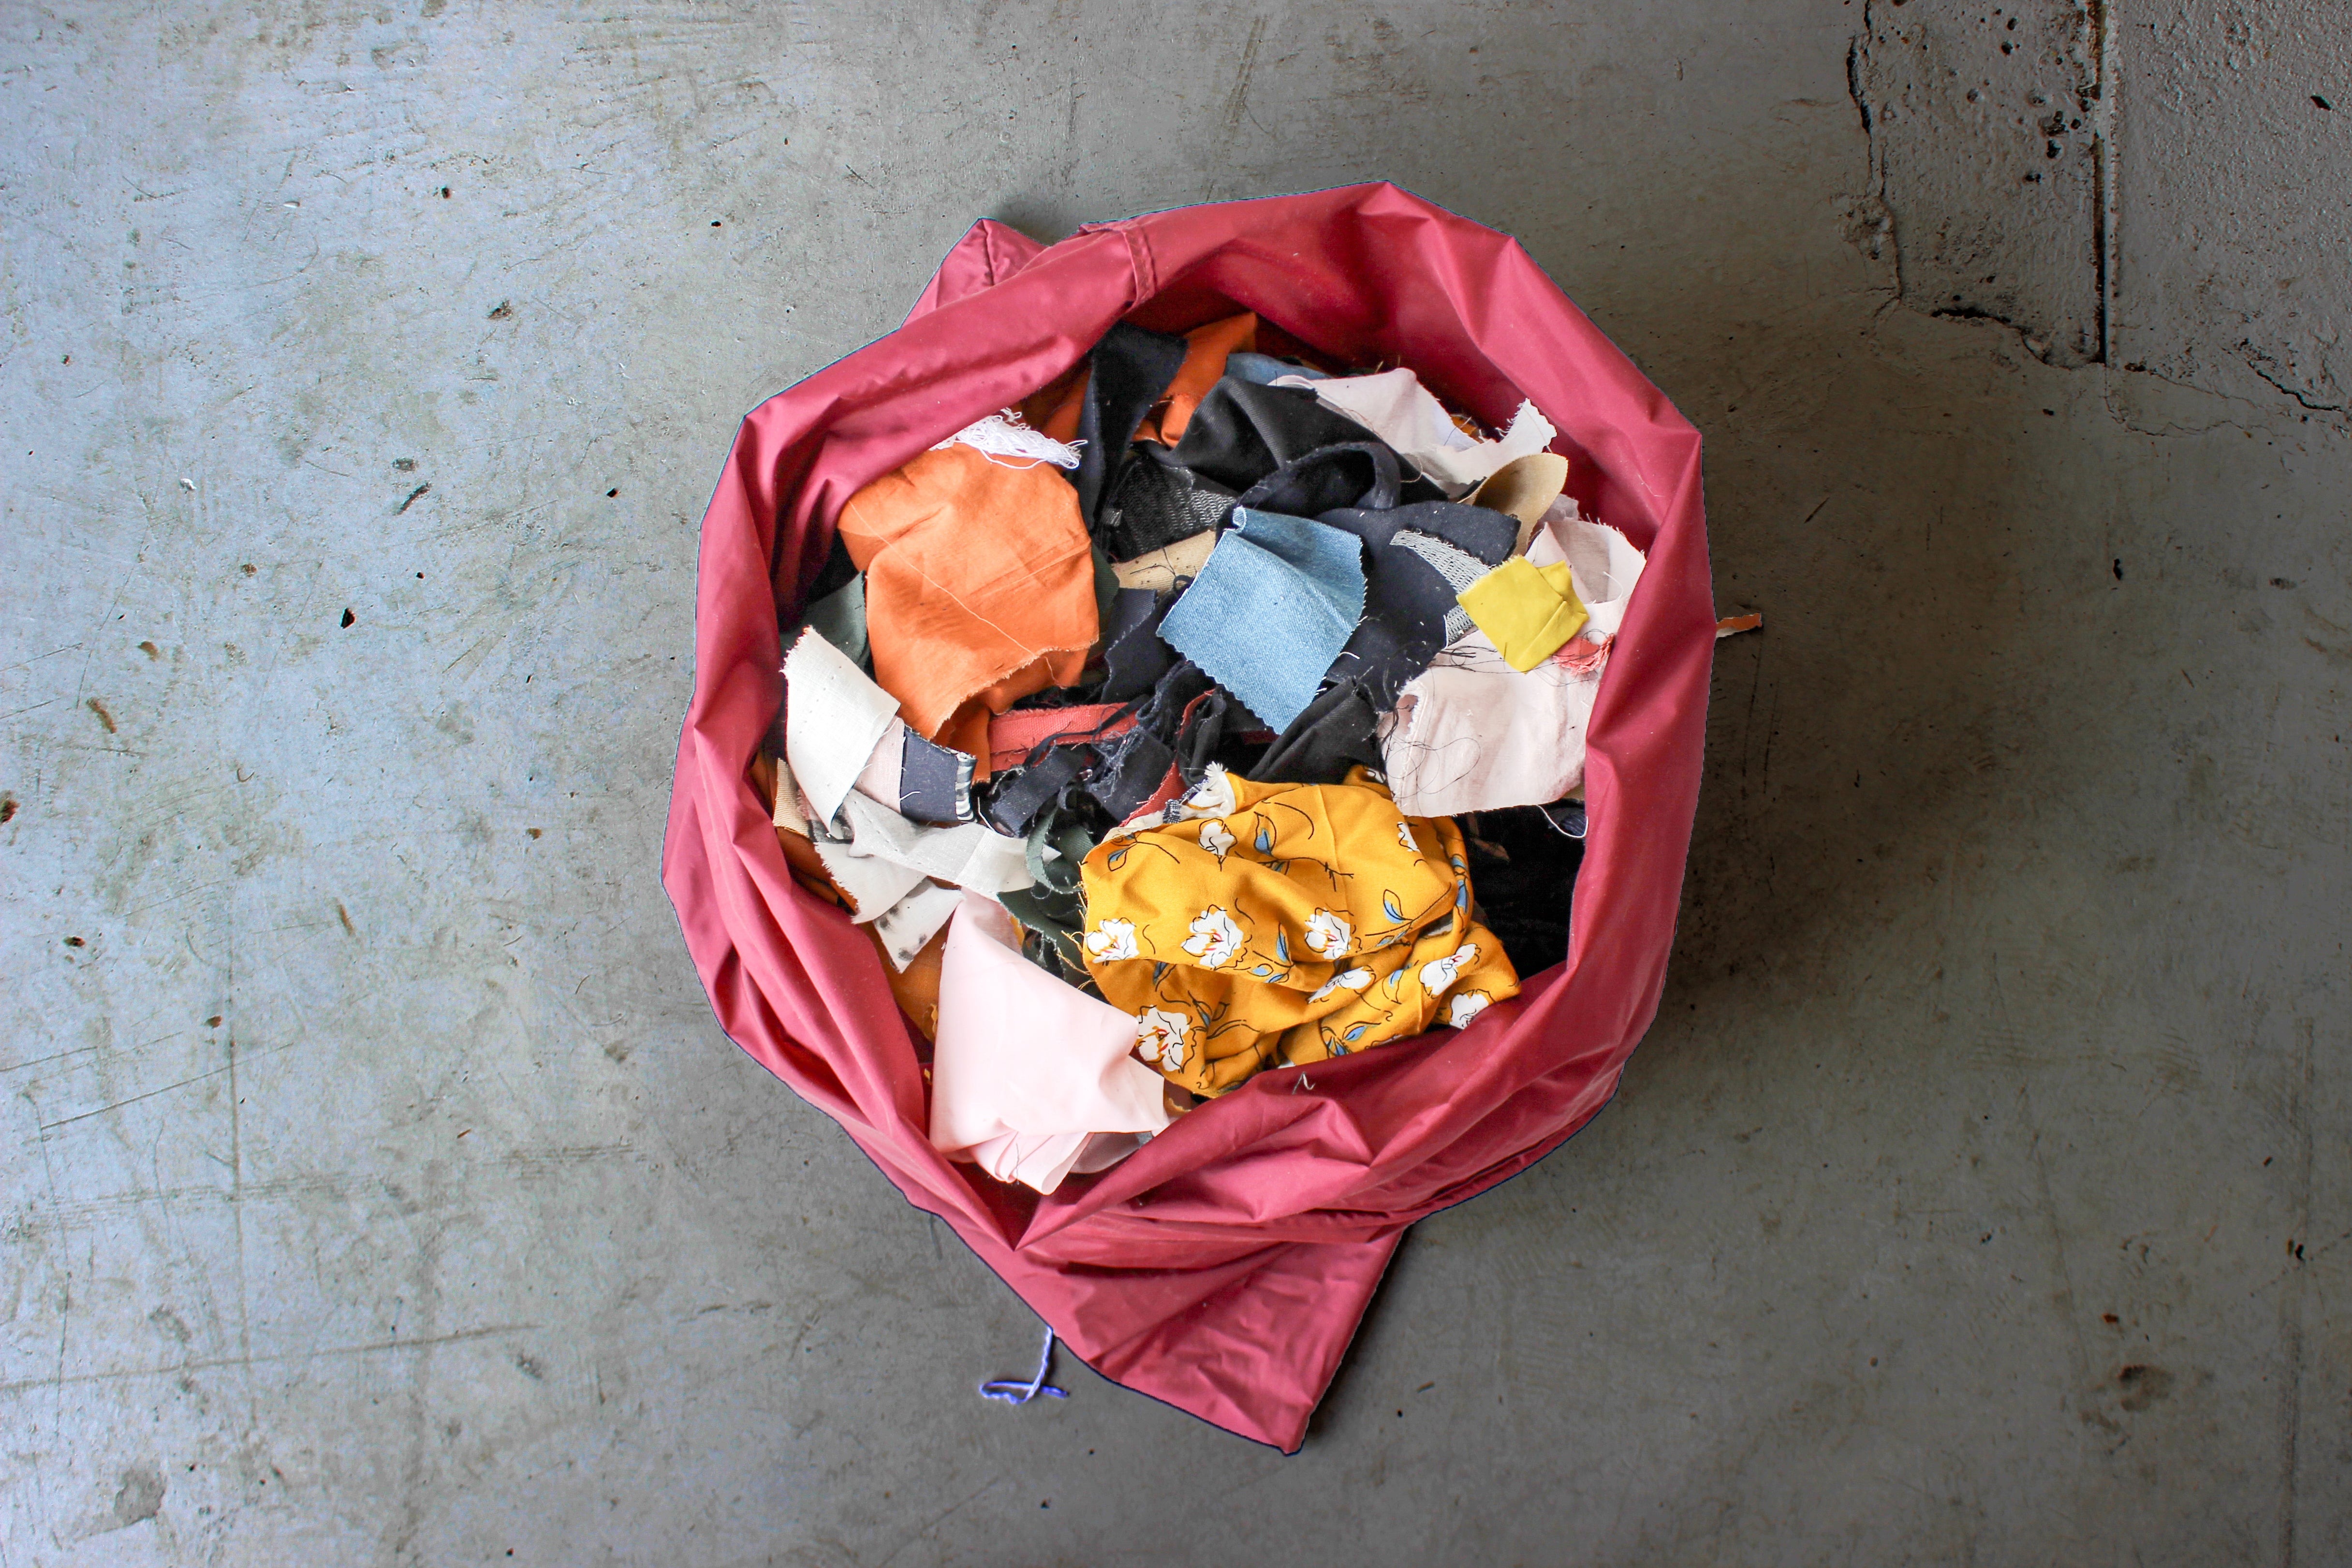 How We Manage Our Textile Waste